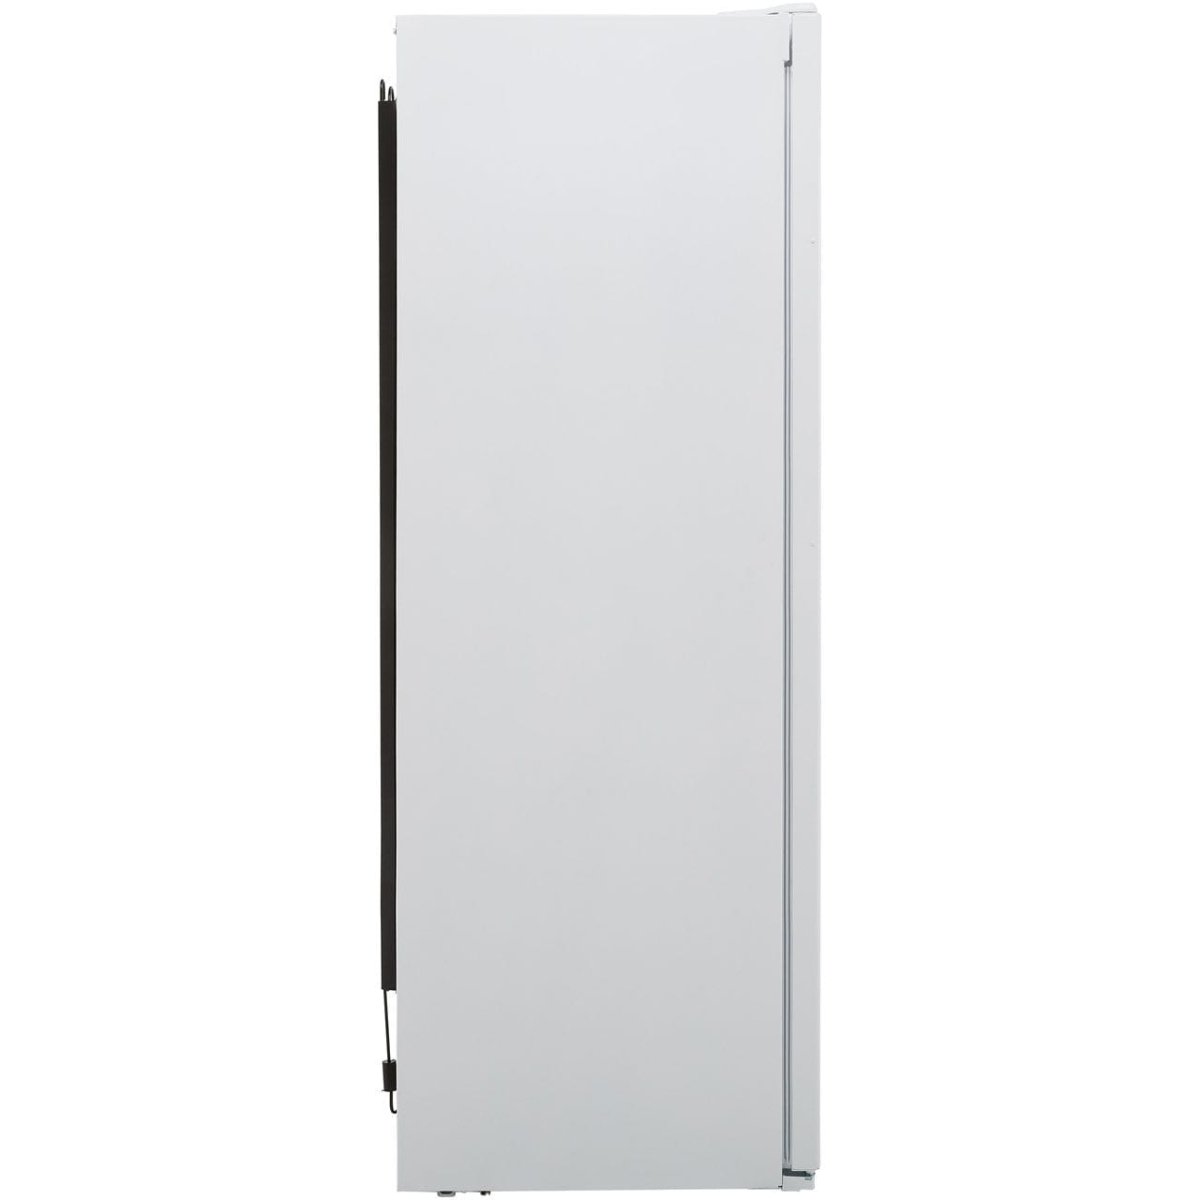 Hotpoint UH6F1CW 222 Litre Freestanding Upright Freezer 167cm Tall Frost Free 60cm Wide - White | Atlantic Electrics